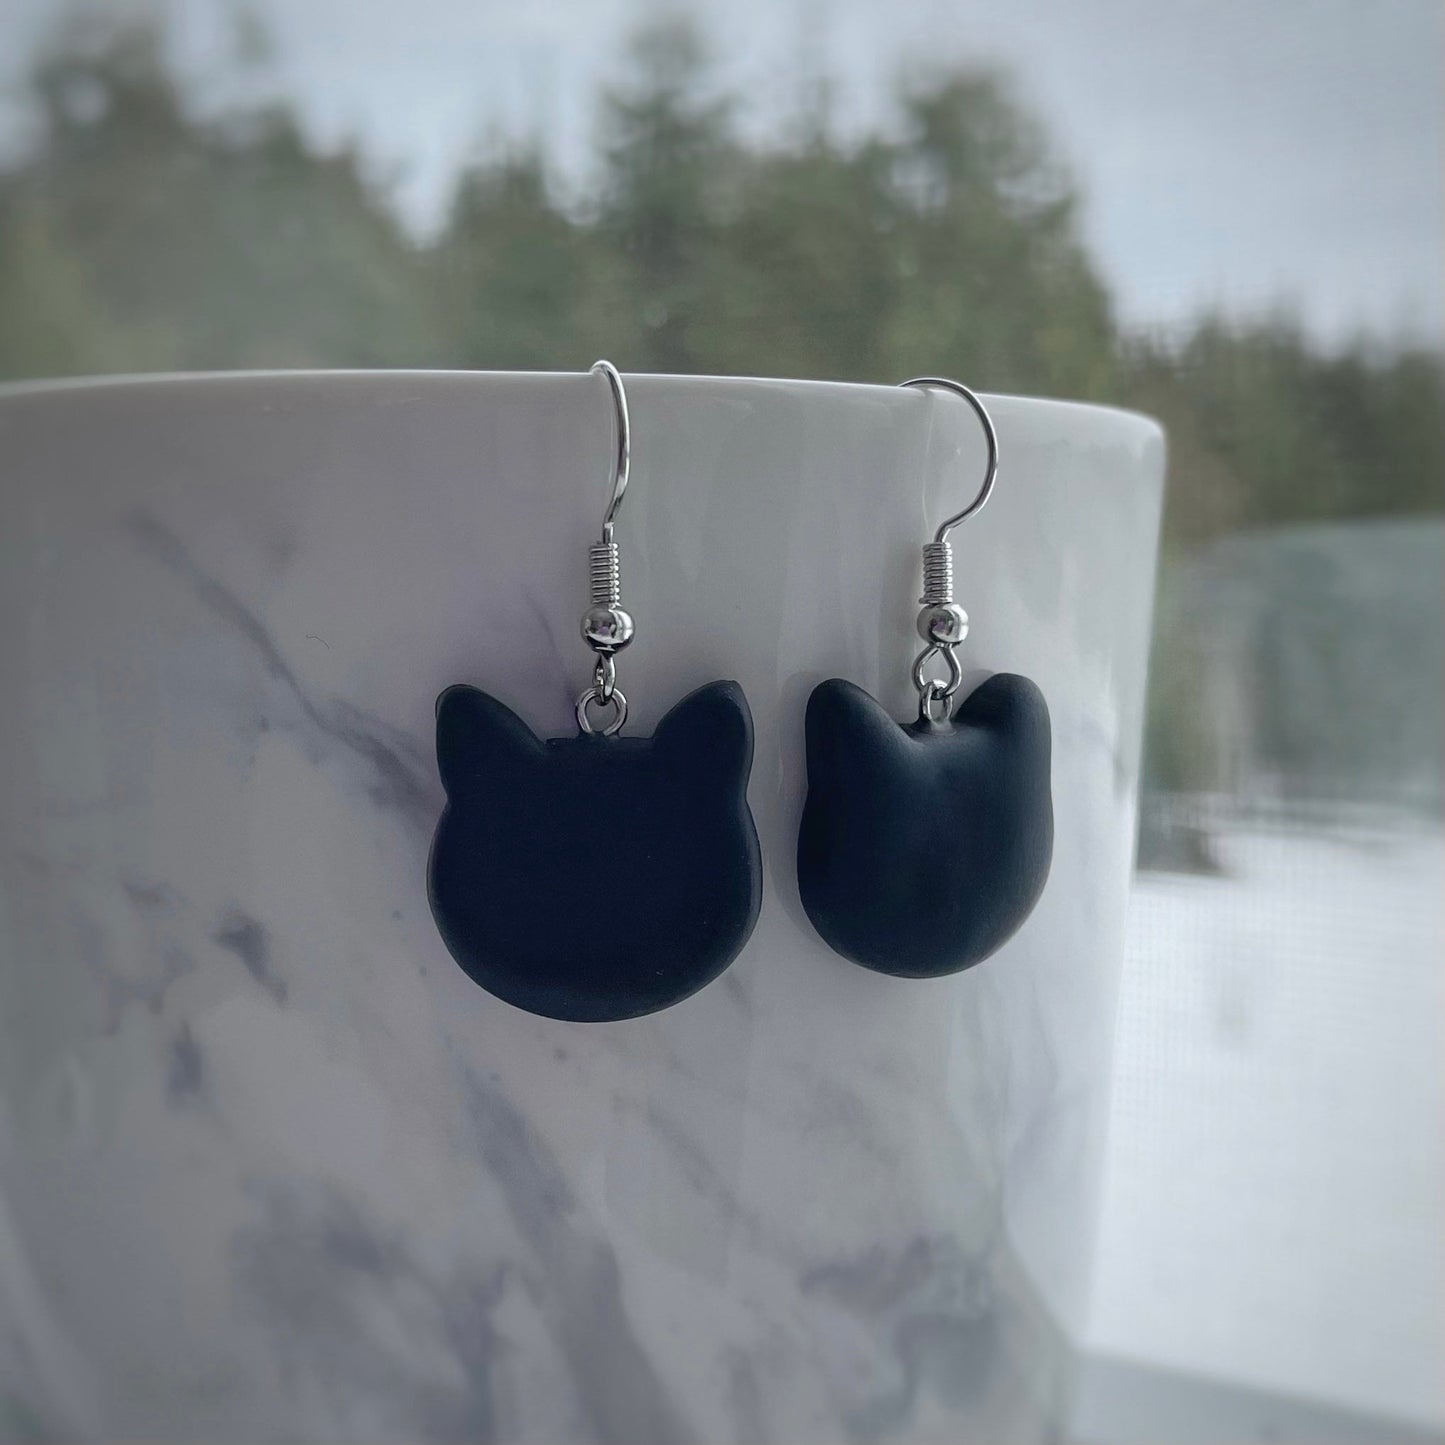 Black Cat Earrings from Impressions with Clay | Polymer Clay